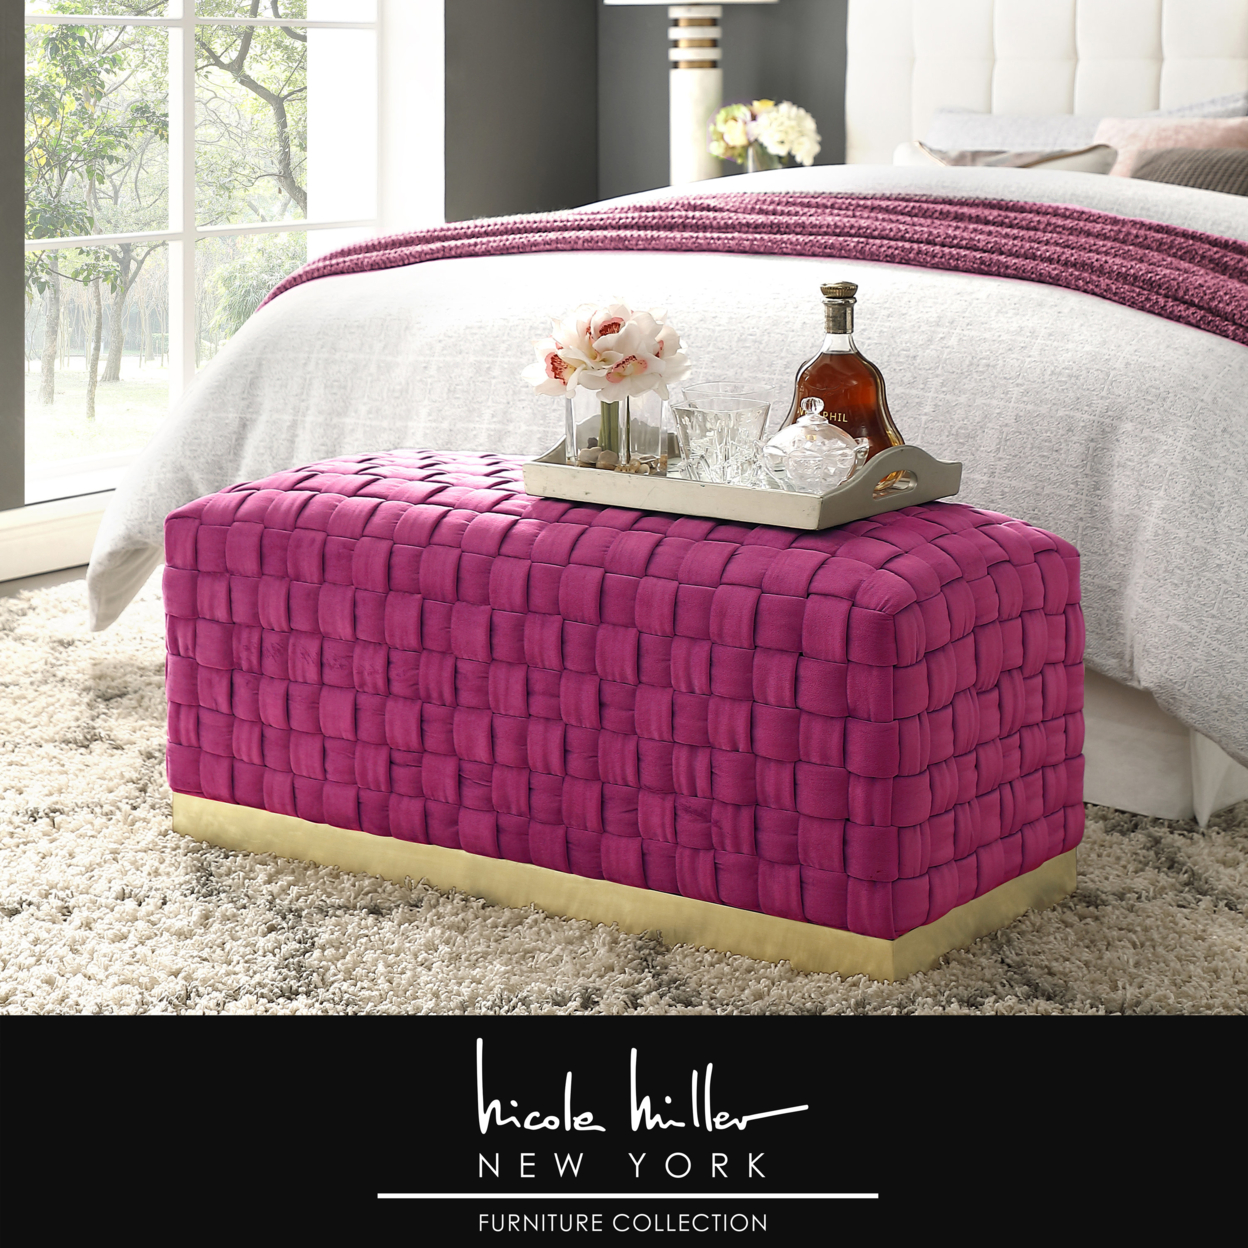 Griffin Velvet Hand Woven Bench-Luxurious Upholstery-Matte Stainless Steel Base-By Nicole Miller - Fuchsia/ Gold